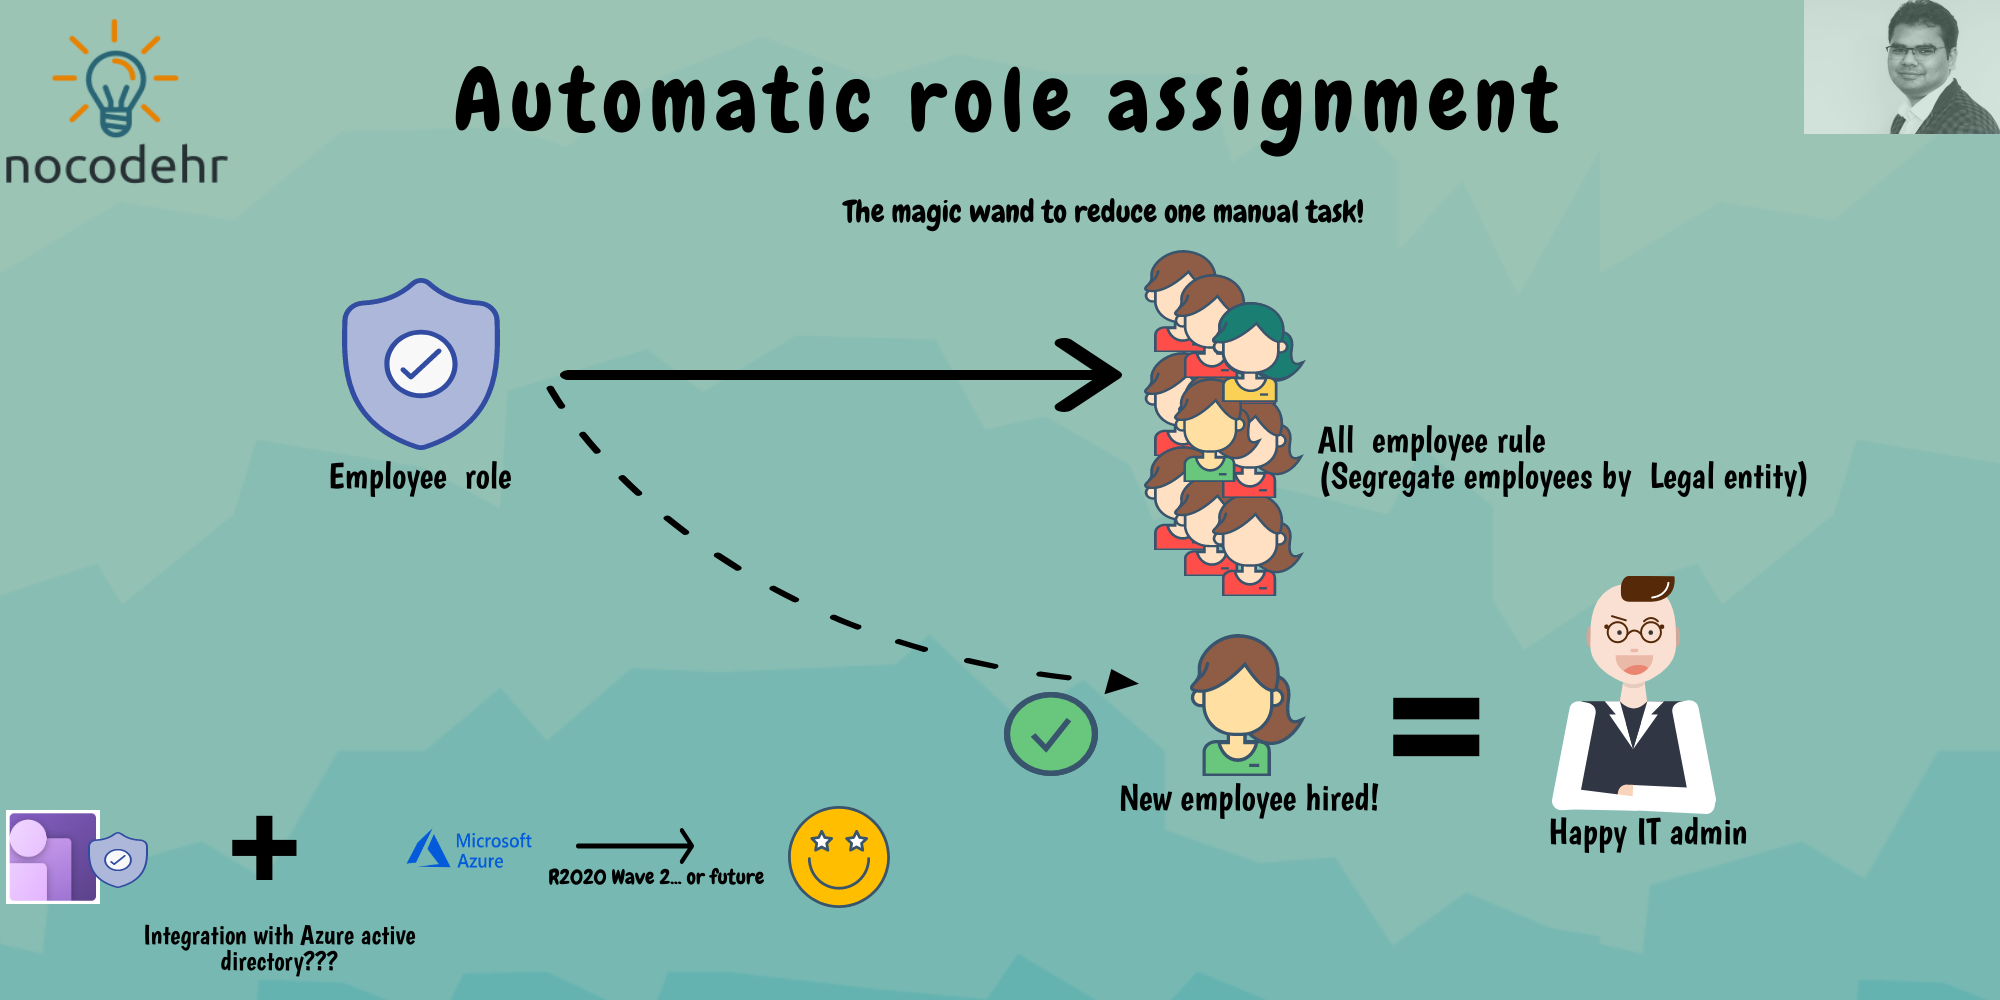 is role assignment